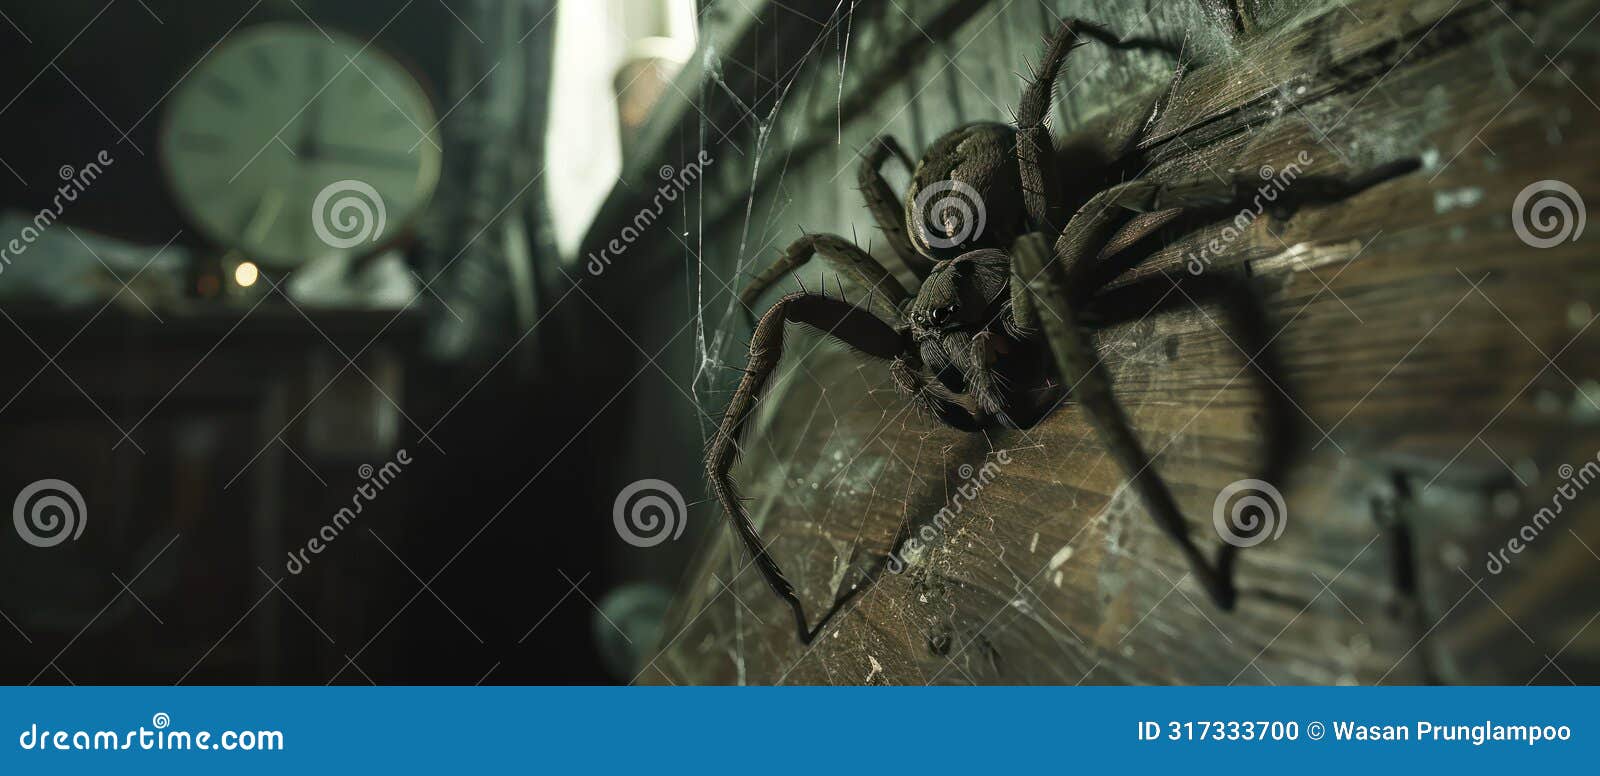 a giant spider is crawling on the wall. it is dark and scary